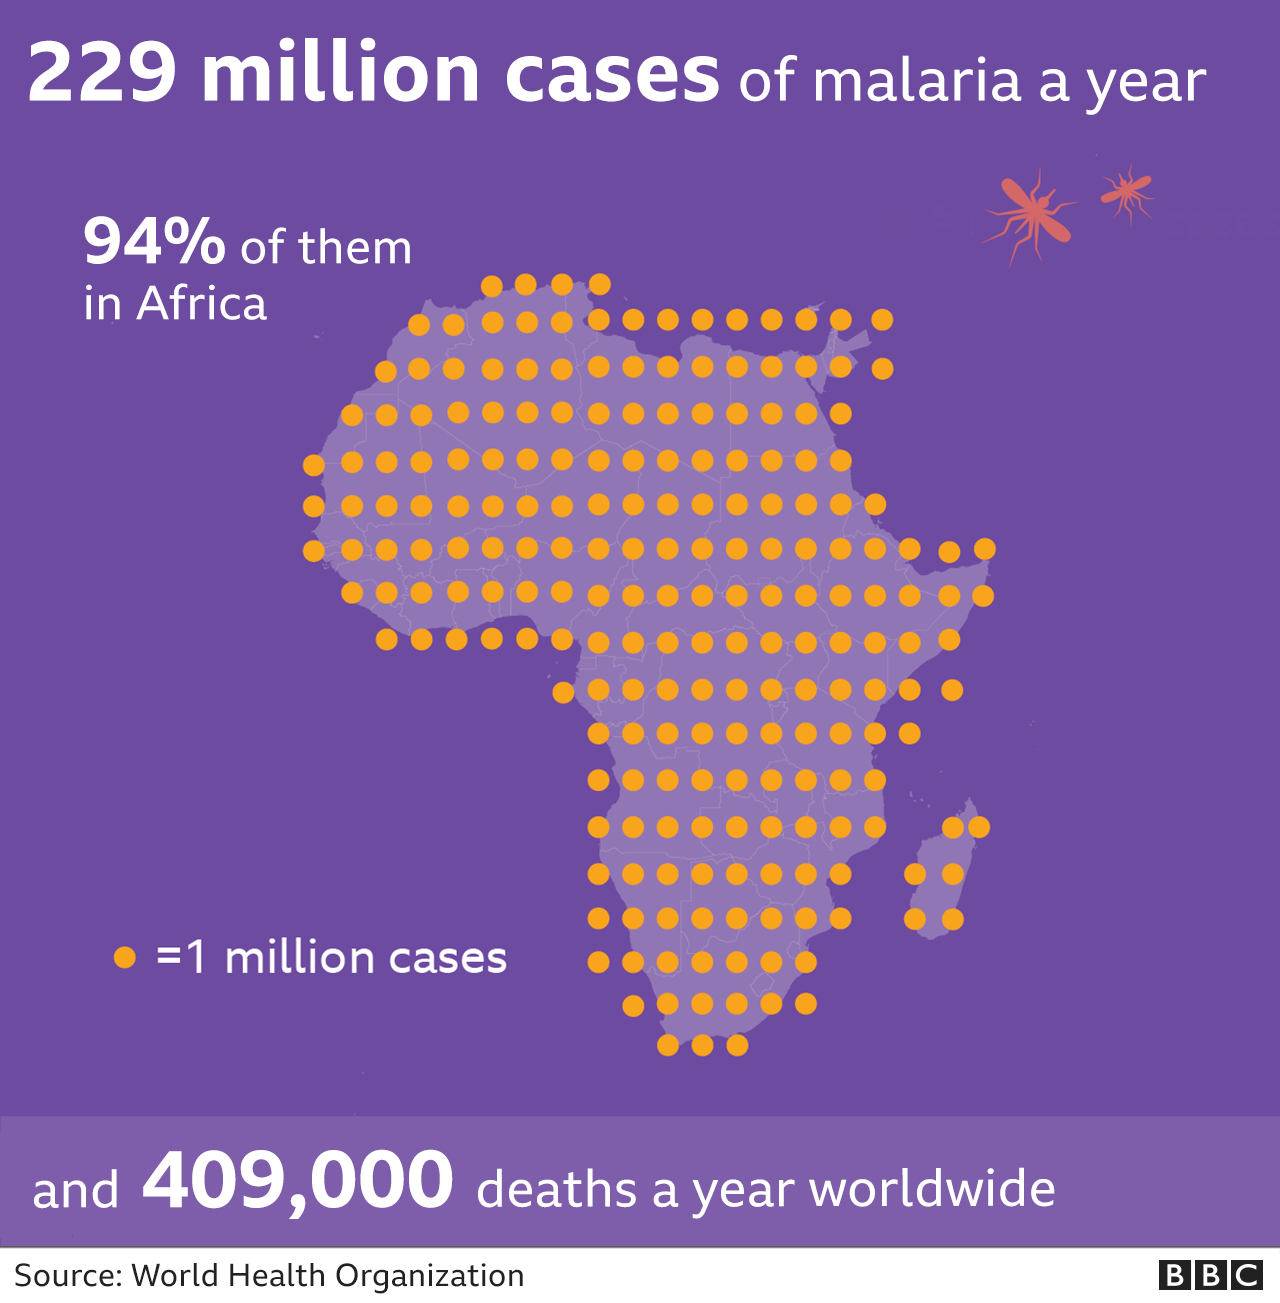 There are around 400,000 deaths from malaria every year